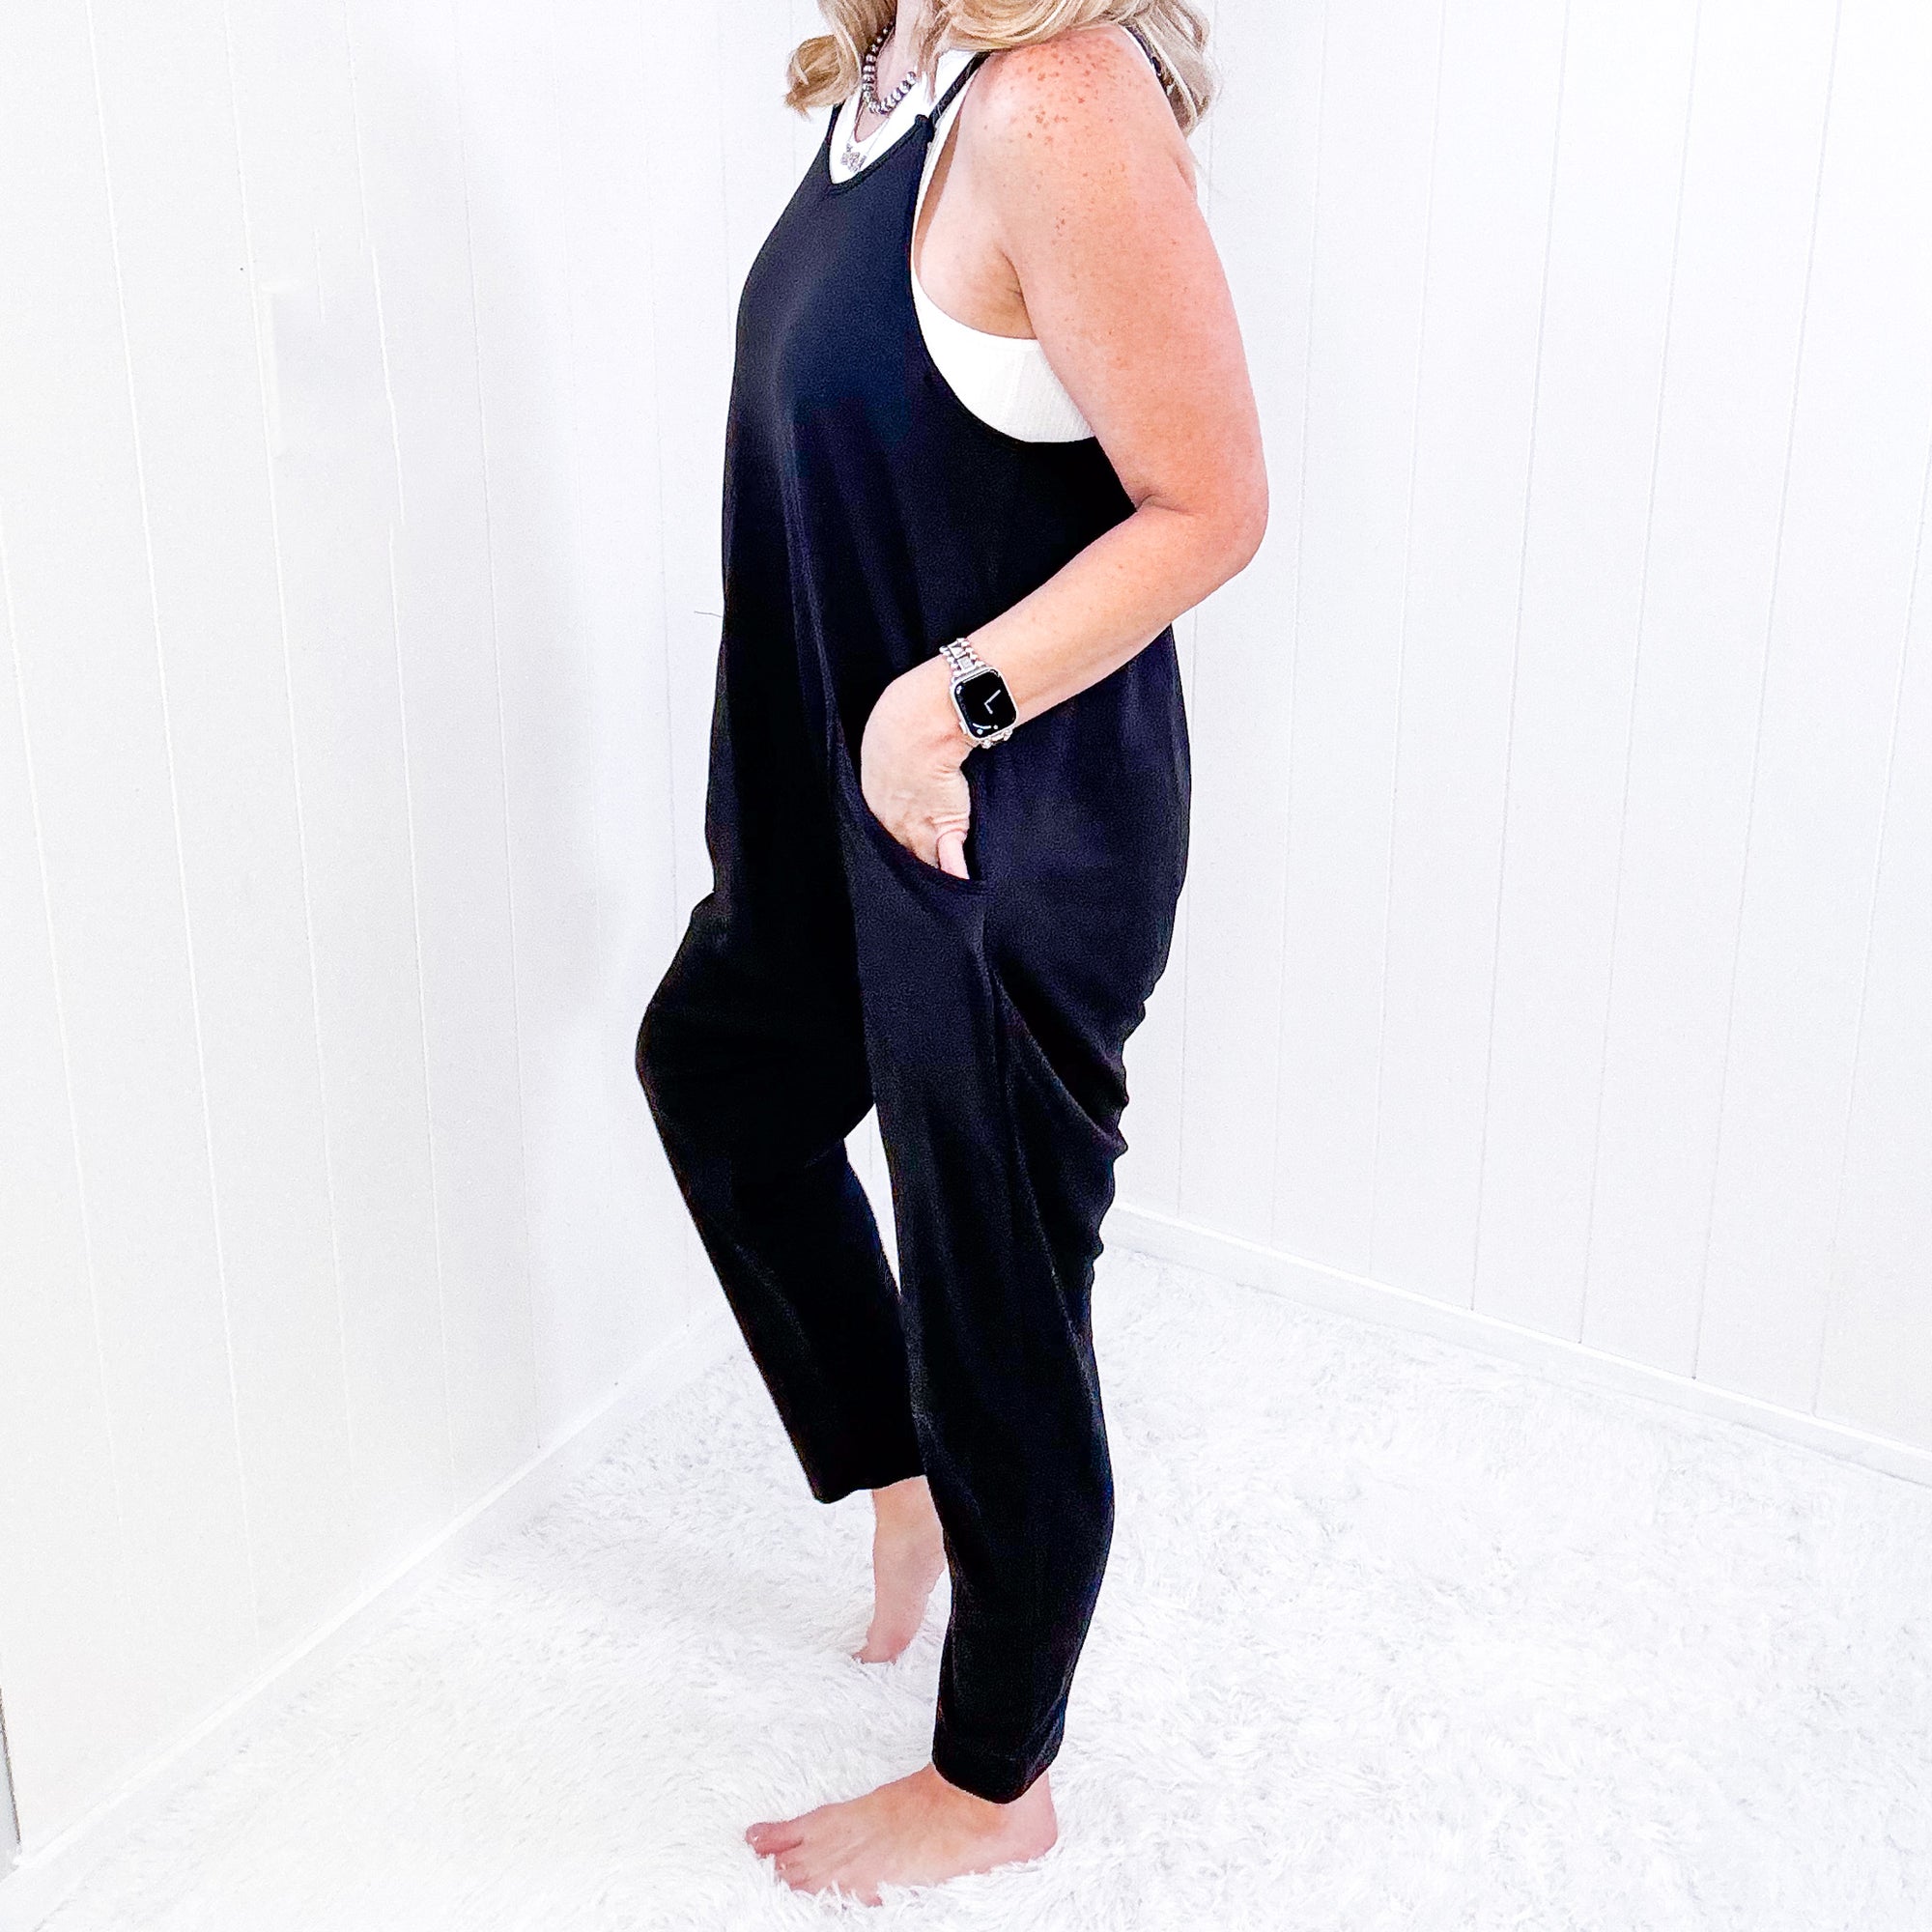 Double Take Full Size V-Neck Sleeveless Jumpsuit with Pockets - Boujee Boutique 